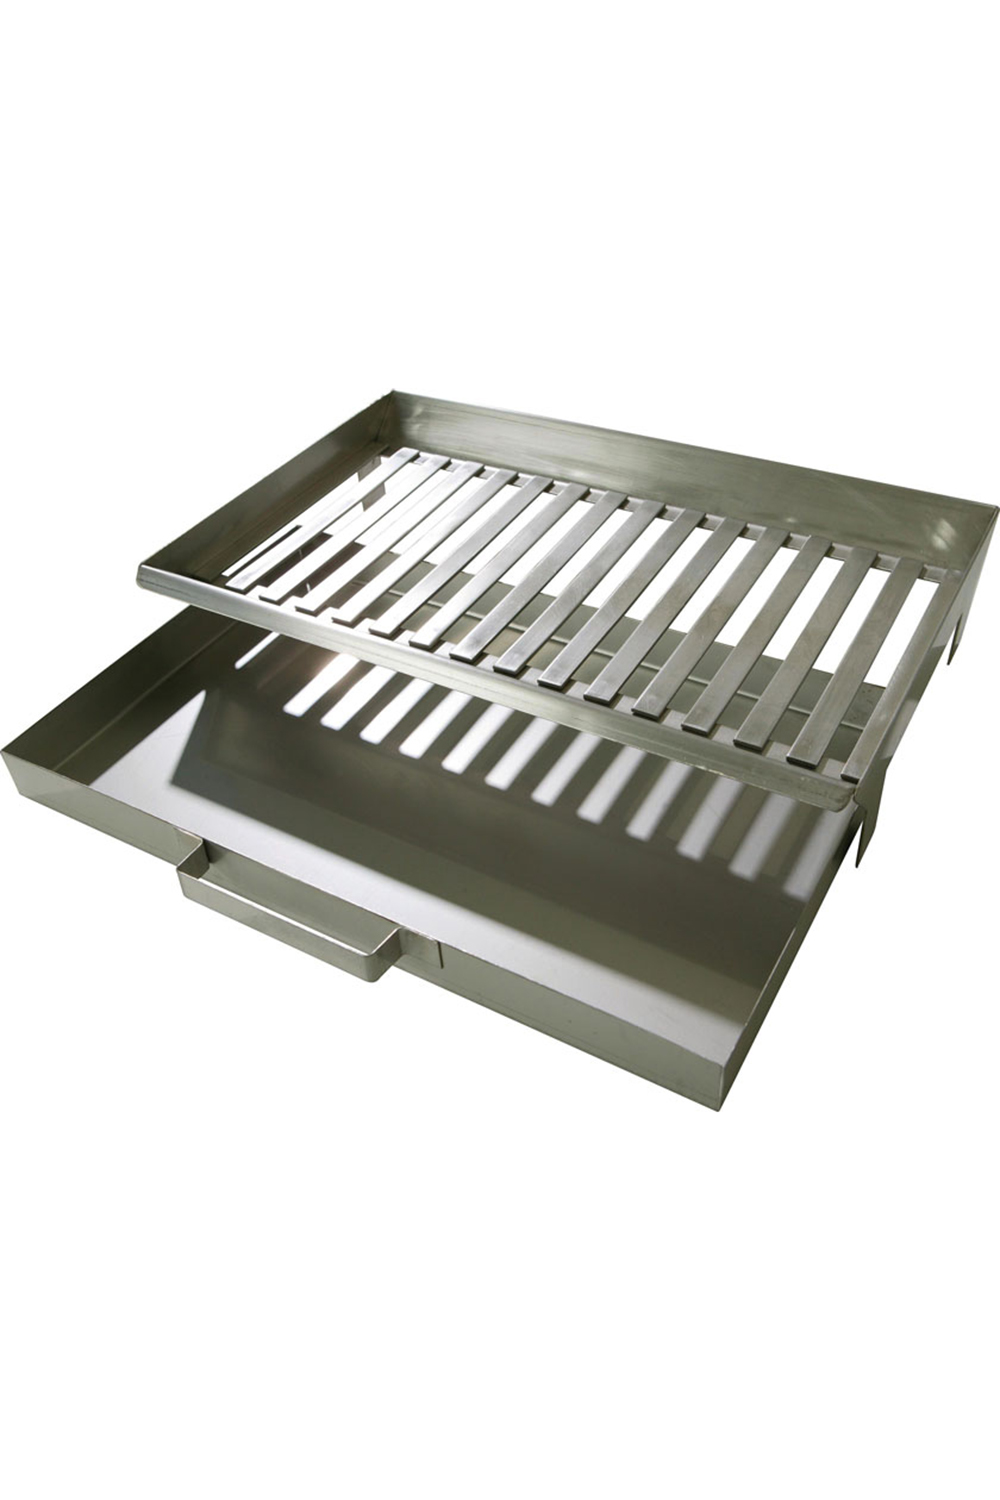 Grill Grate 70x30 cm Grill Grille for Buschbeck Grill Grate Fireplace Universal BITWA 